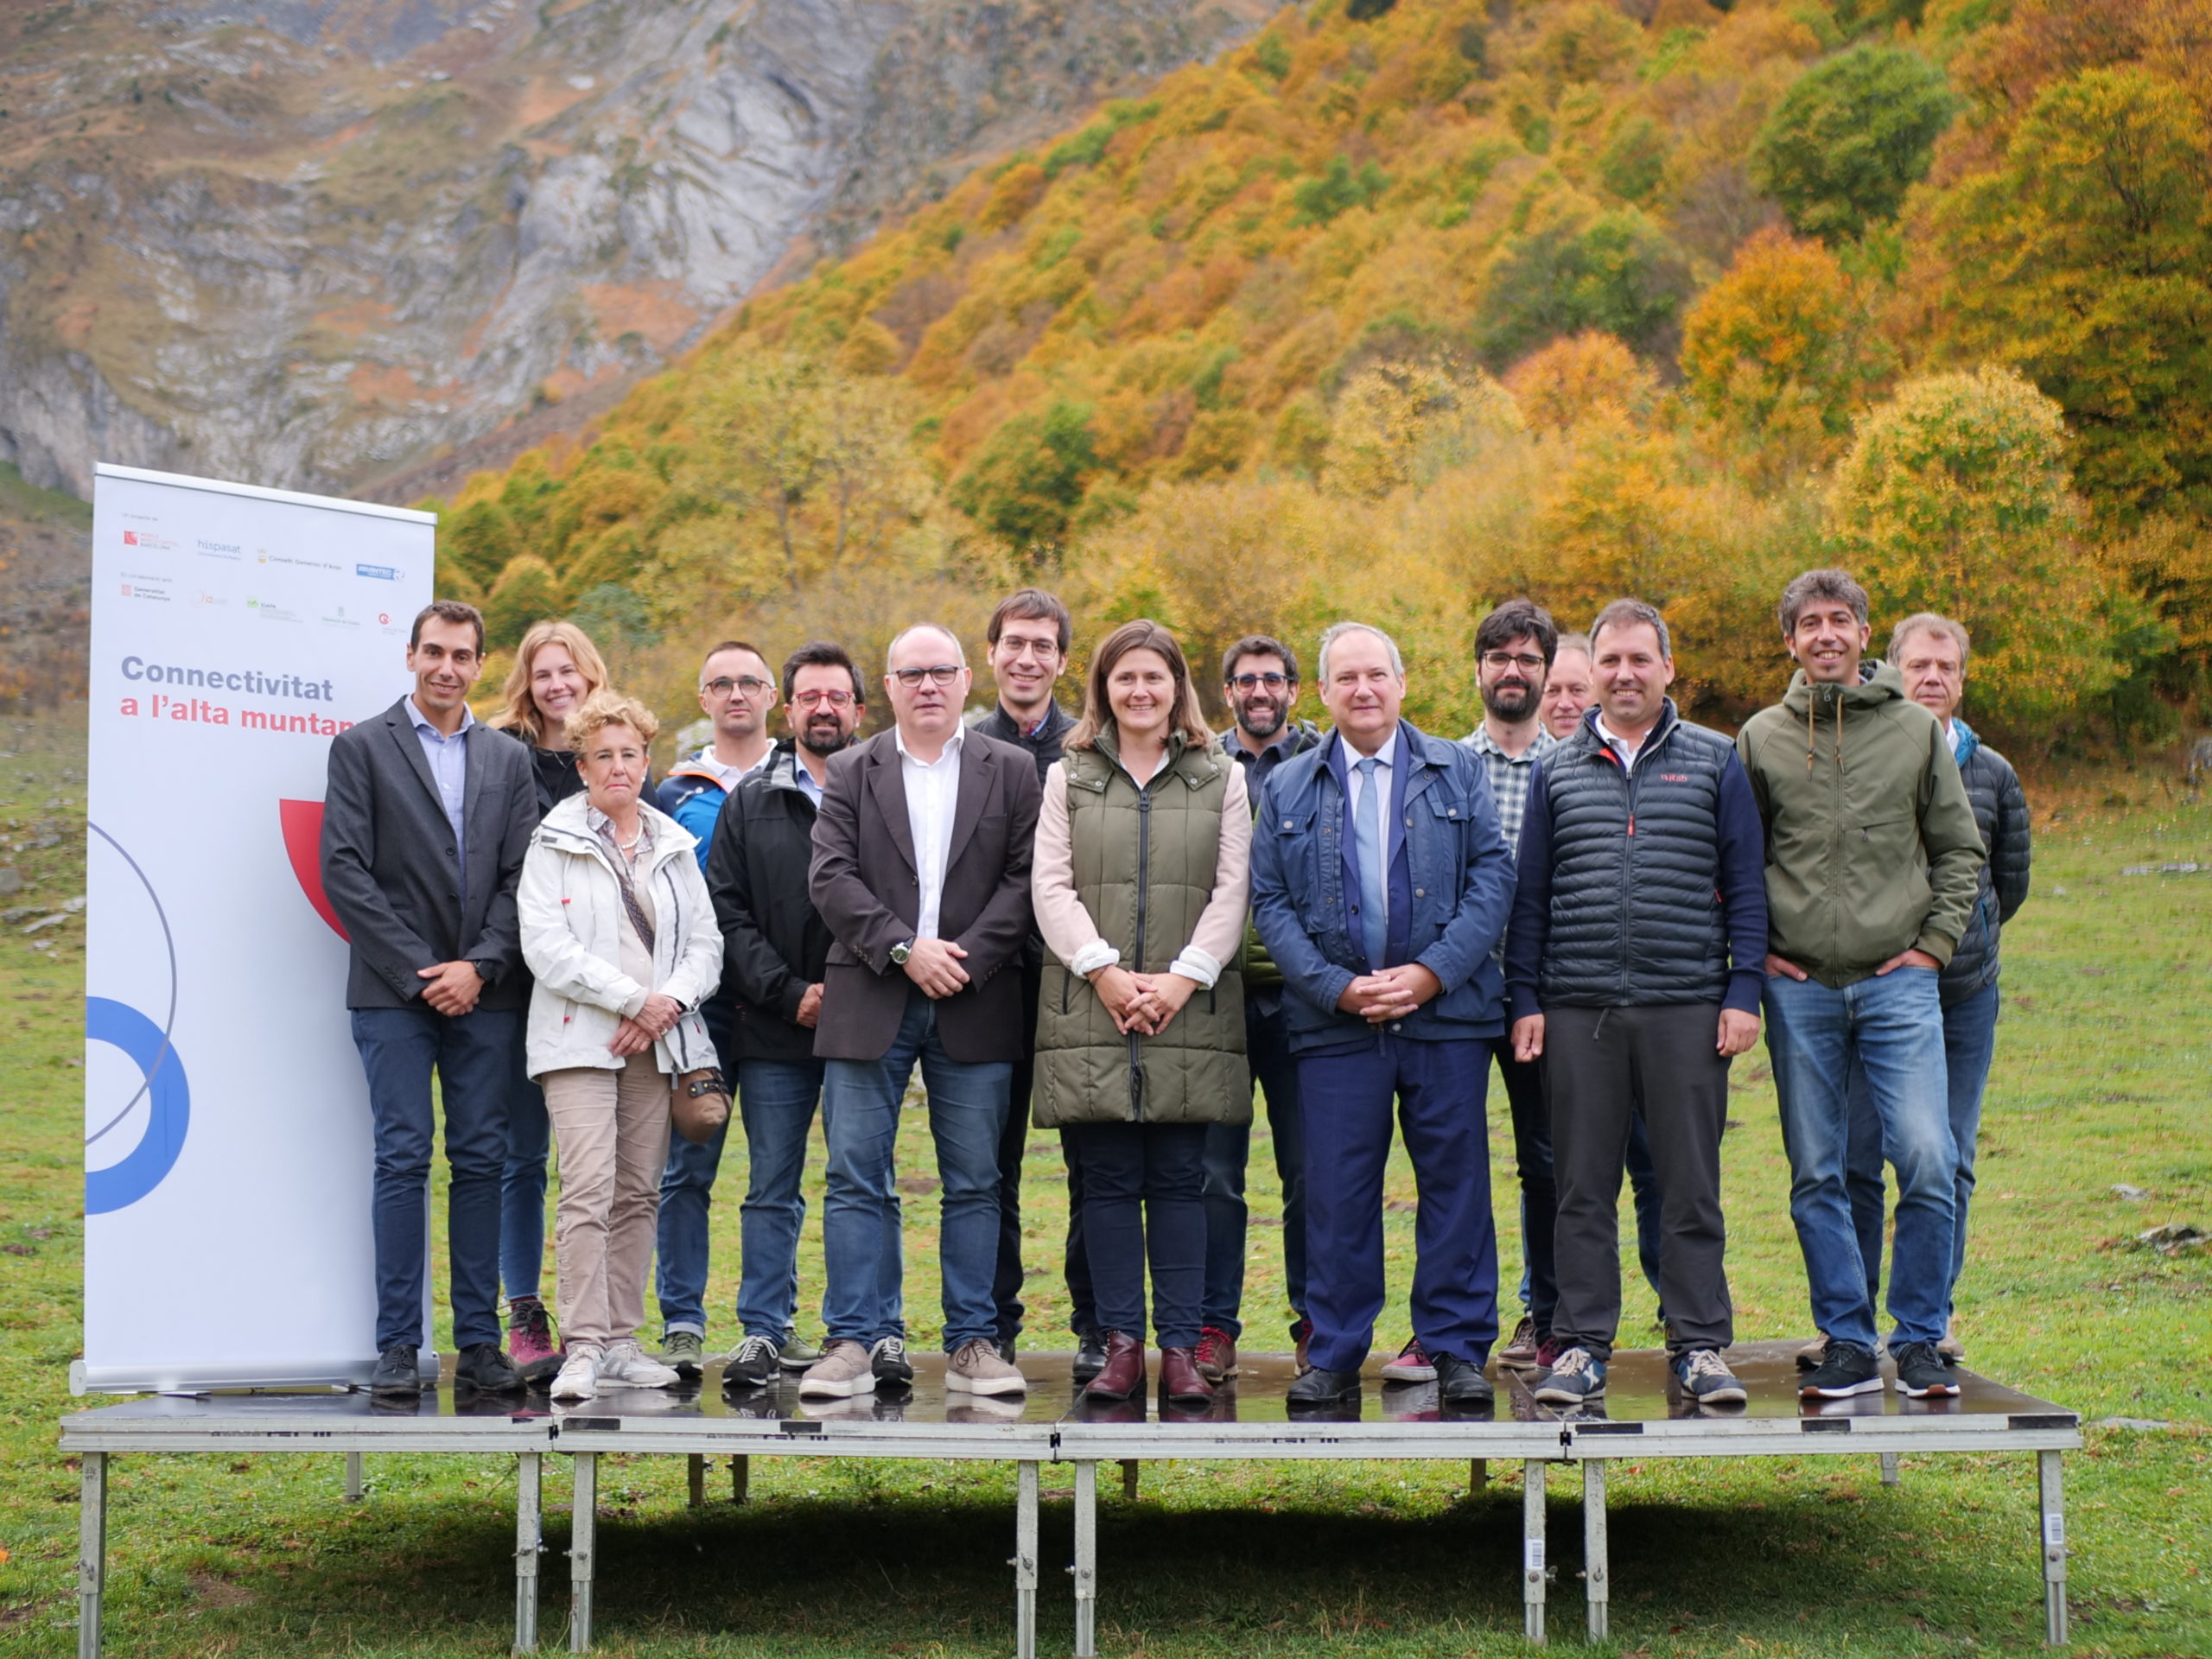 Artiga de Lin refuge inaugurates satellite connectivity to improve the management of its high mountain environment